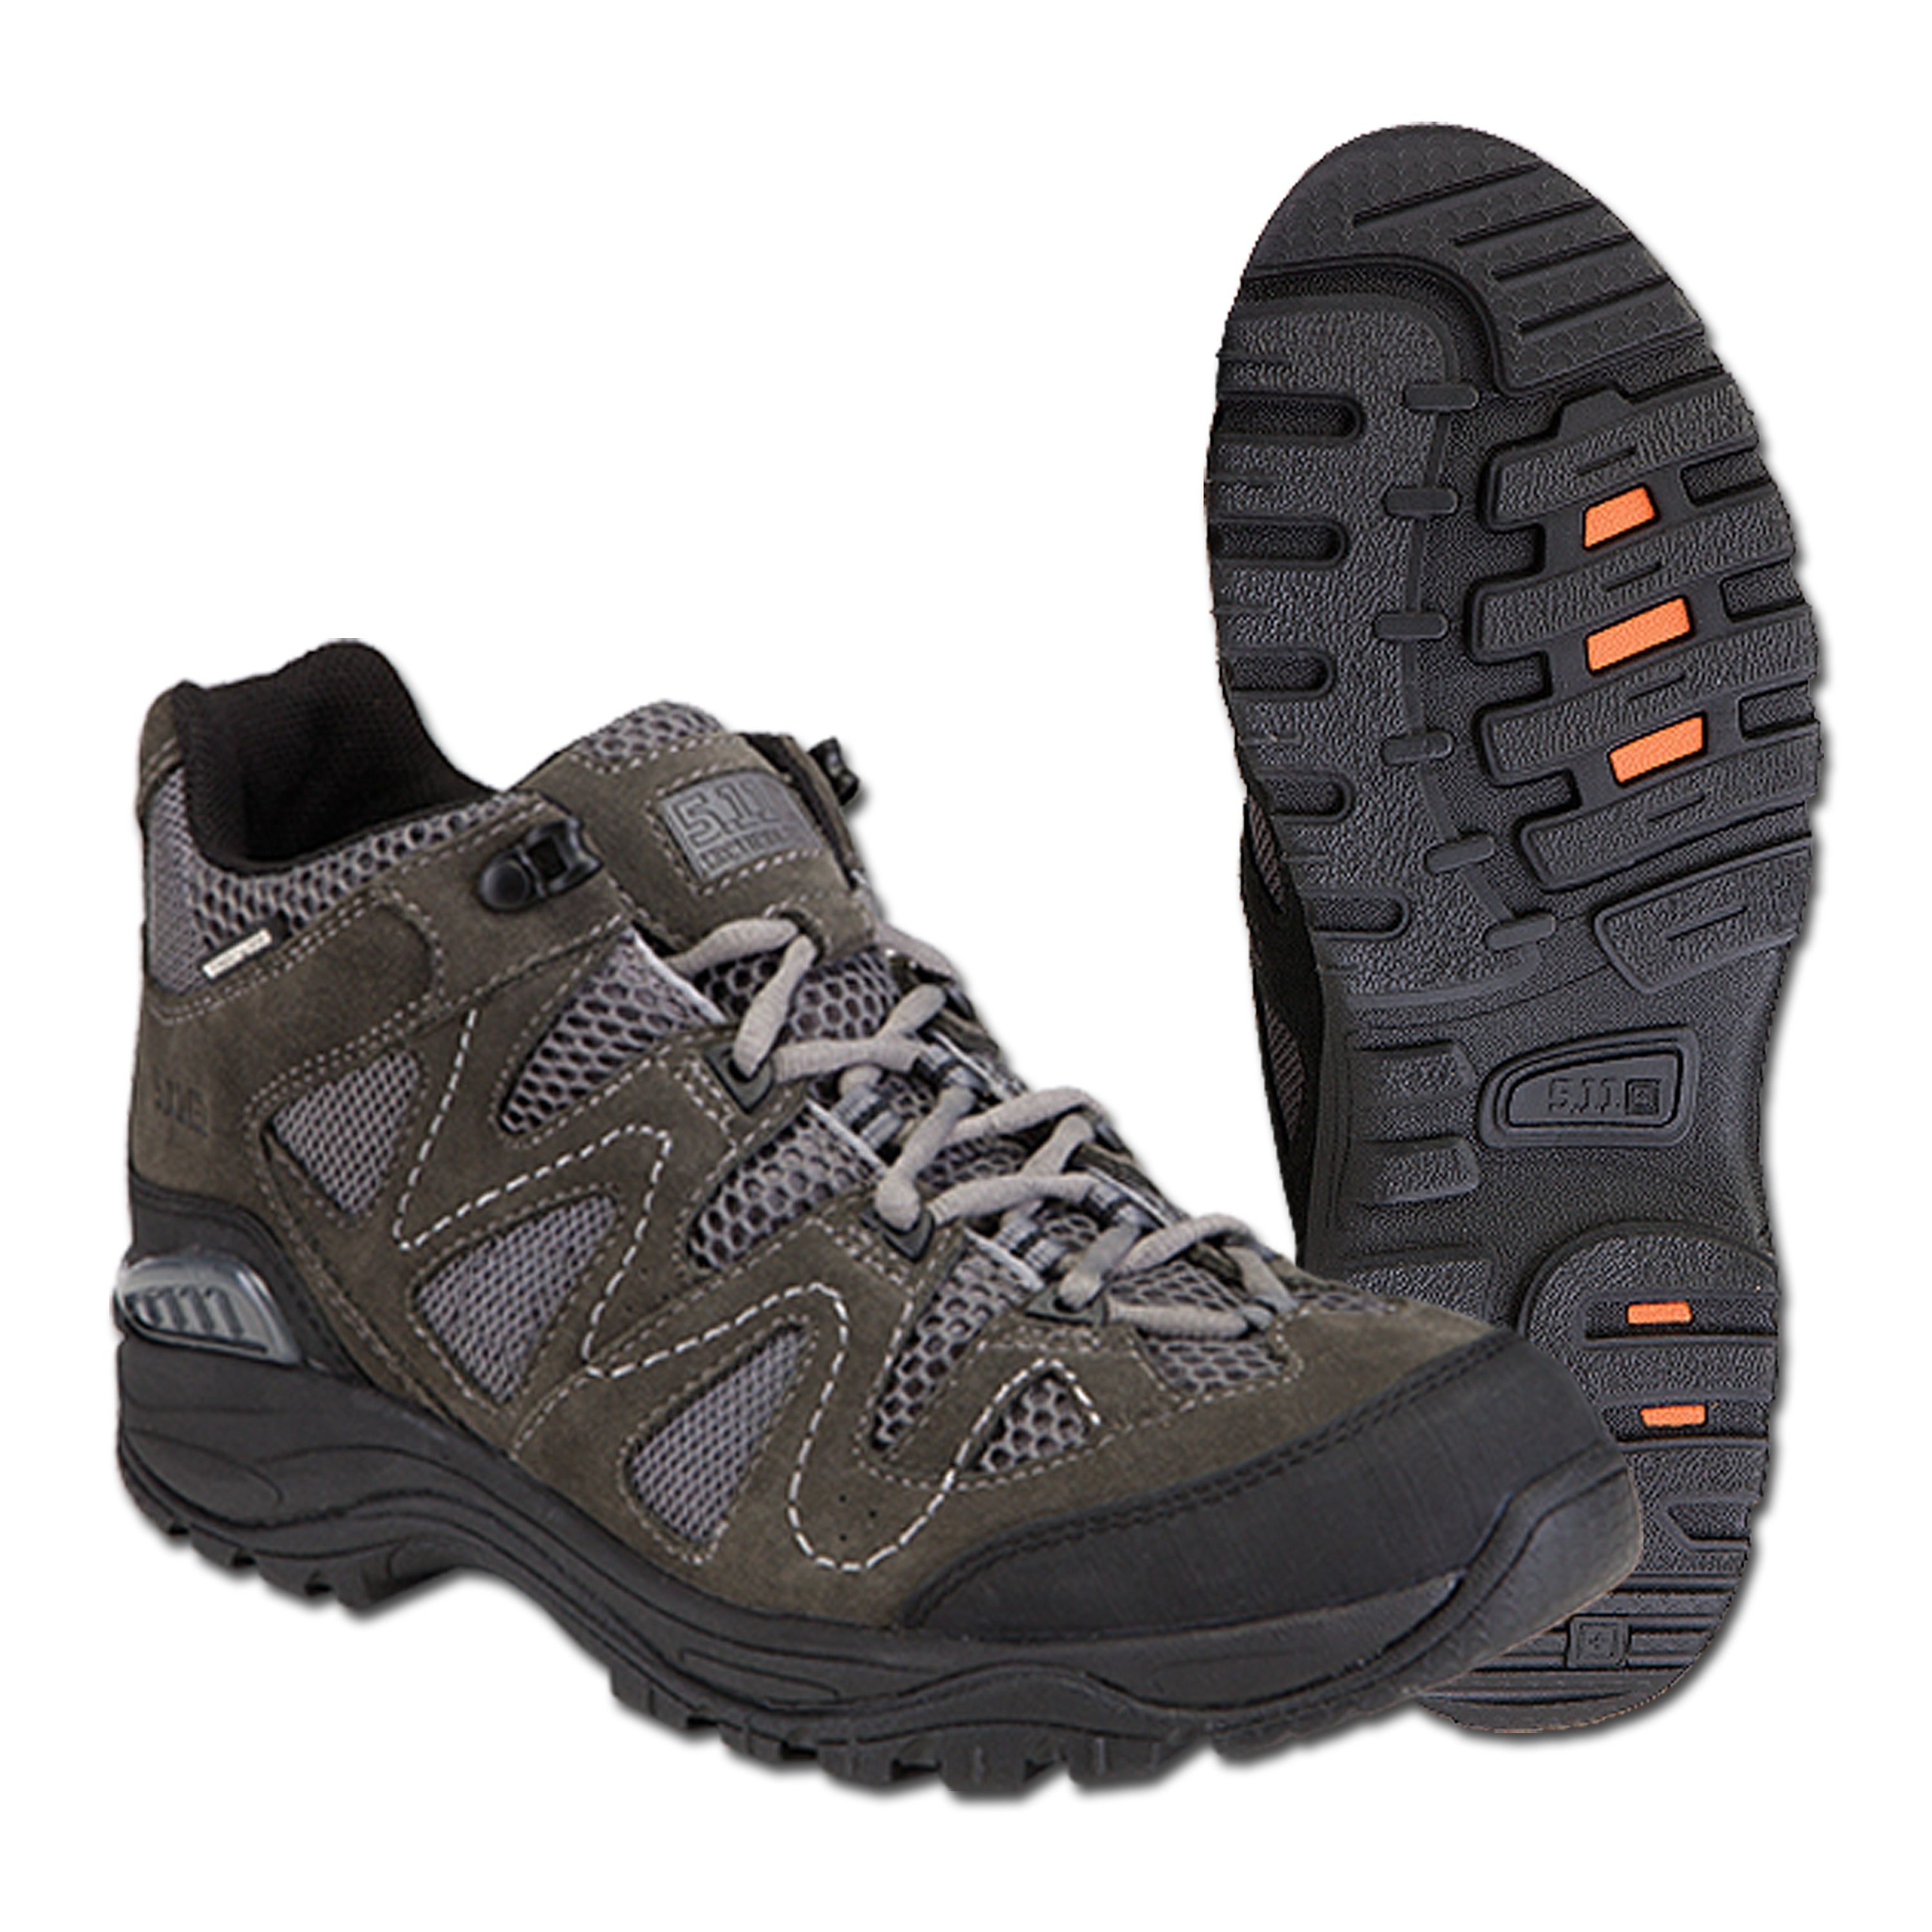 5.11 Tactical Trainer Mid 2.0, anthracite | 5.11 Tactical Trainer Mid 2 ...